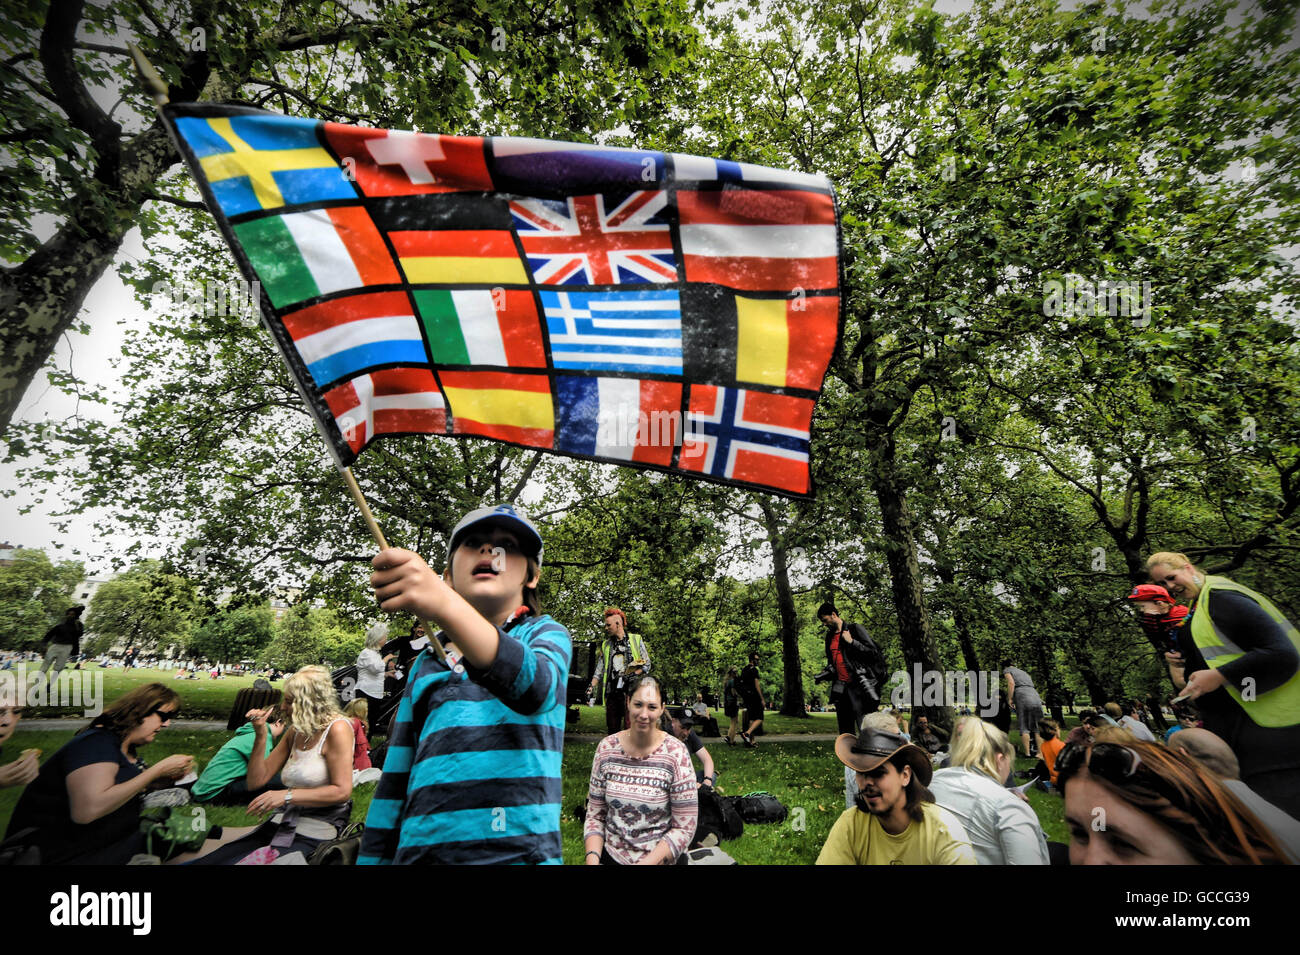 London, UK, UK. 9th July, 2016. Families from across the UK enjoyed a Brexit Picnic organised by 'MoreInCommon' in Green Park London to exchange ideas in groups about what to do next regarding the June 23rd vote for Britain to leave the EU. © Gail Orenstein/ZUMA Wire/Alamy Live News Stock Photo